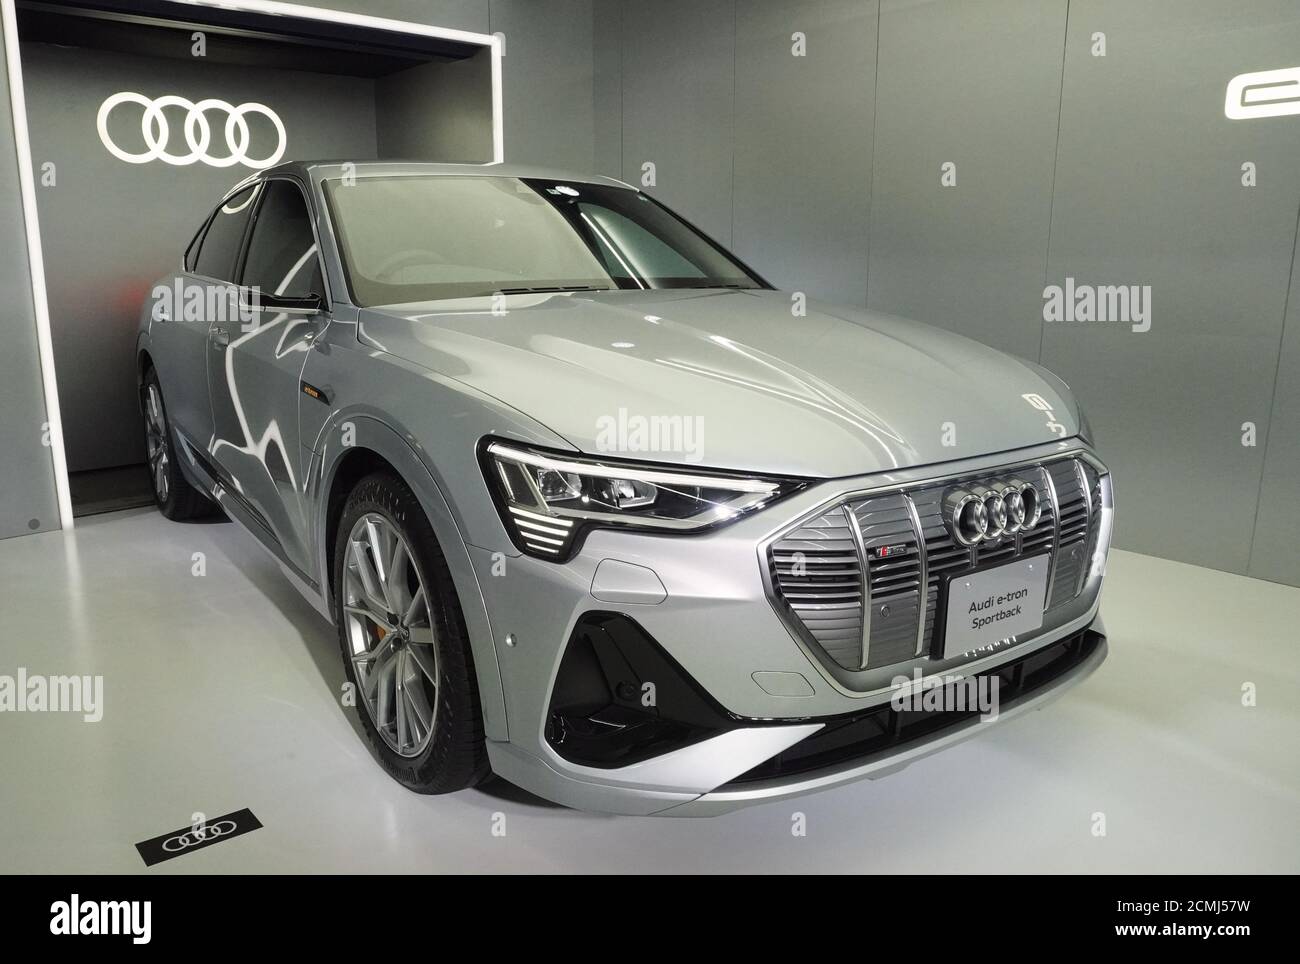 Photo taken in Tokyo on Sept. 17, 2020, shows the Audi e-tron Sportback,  Audi's first electric vehicle to be sold in Japan. The vehicle, launched by Audi  Japan K.K. the same day,